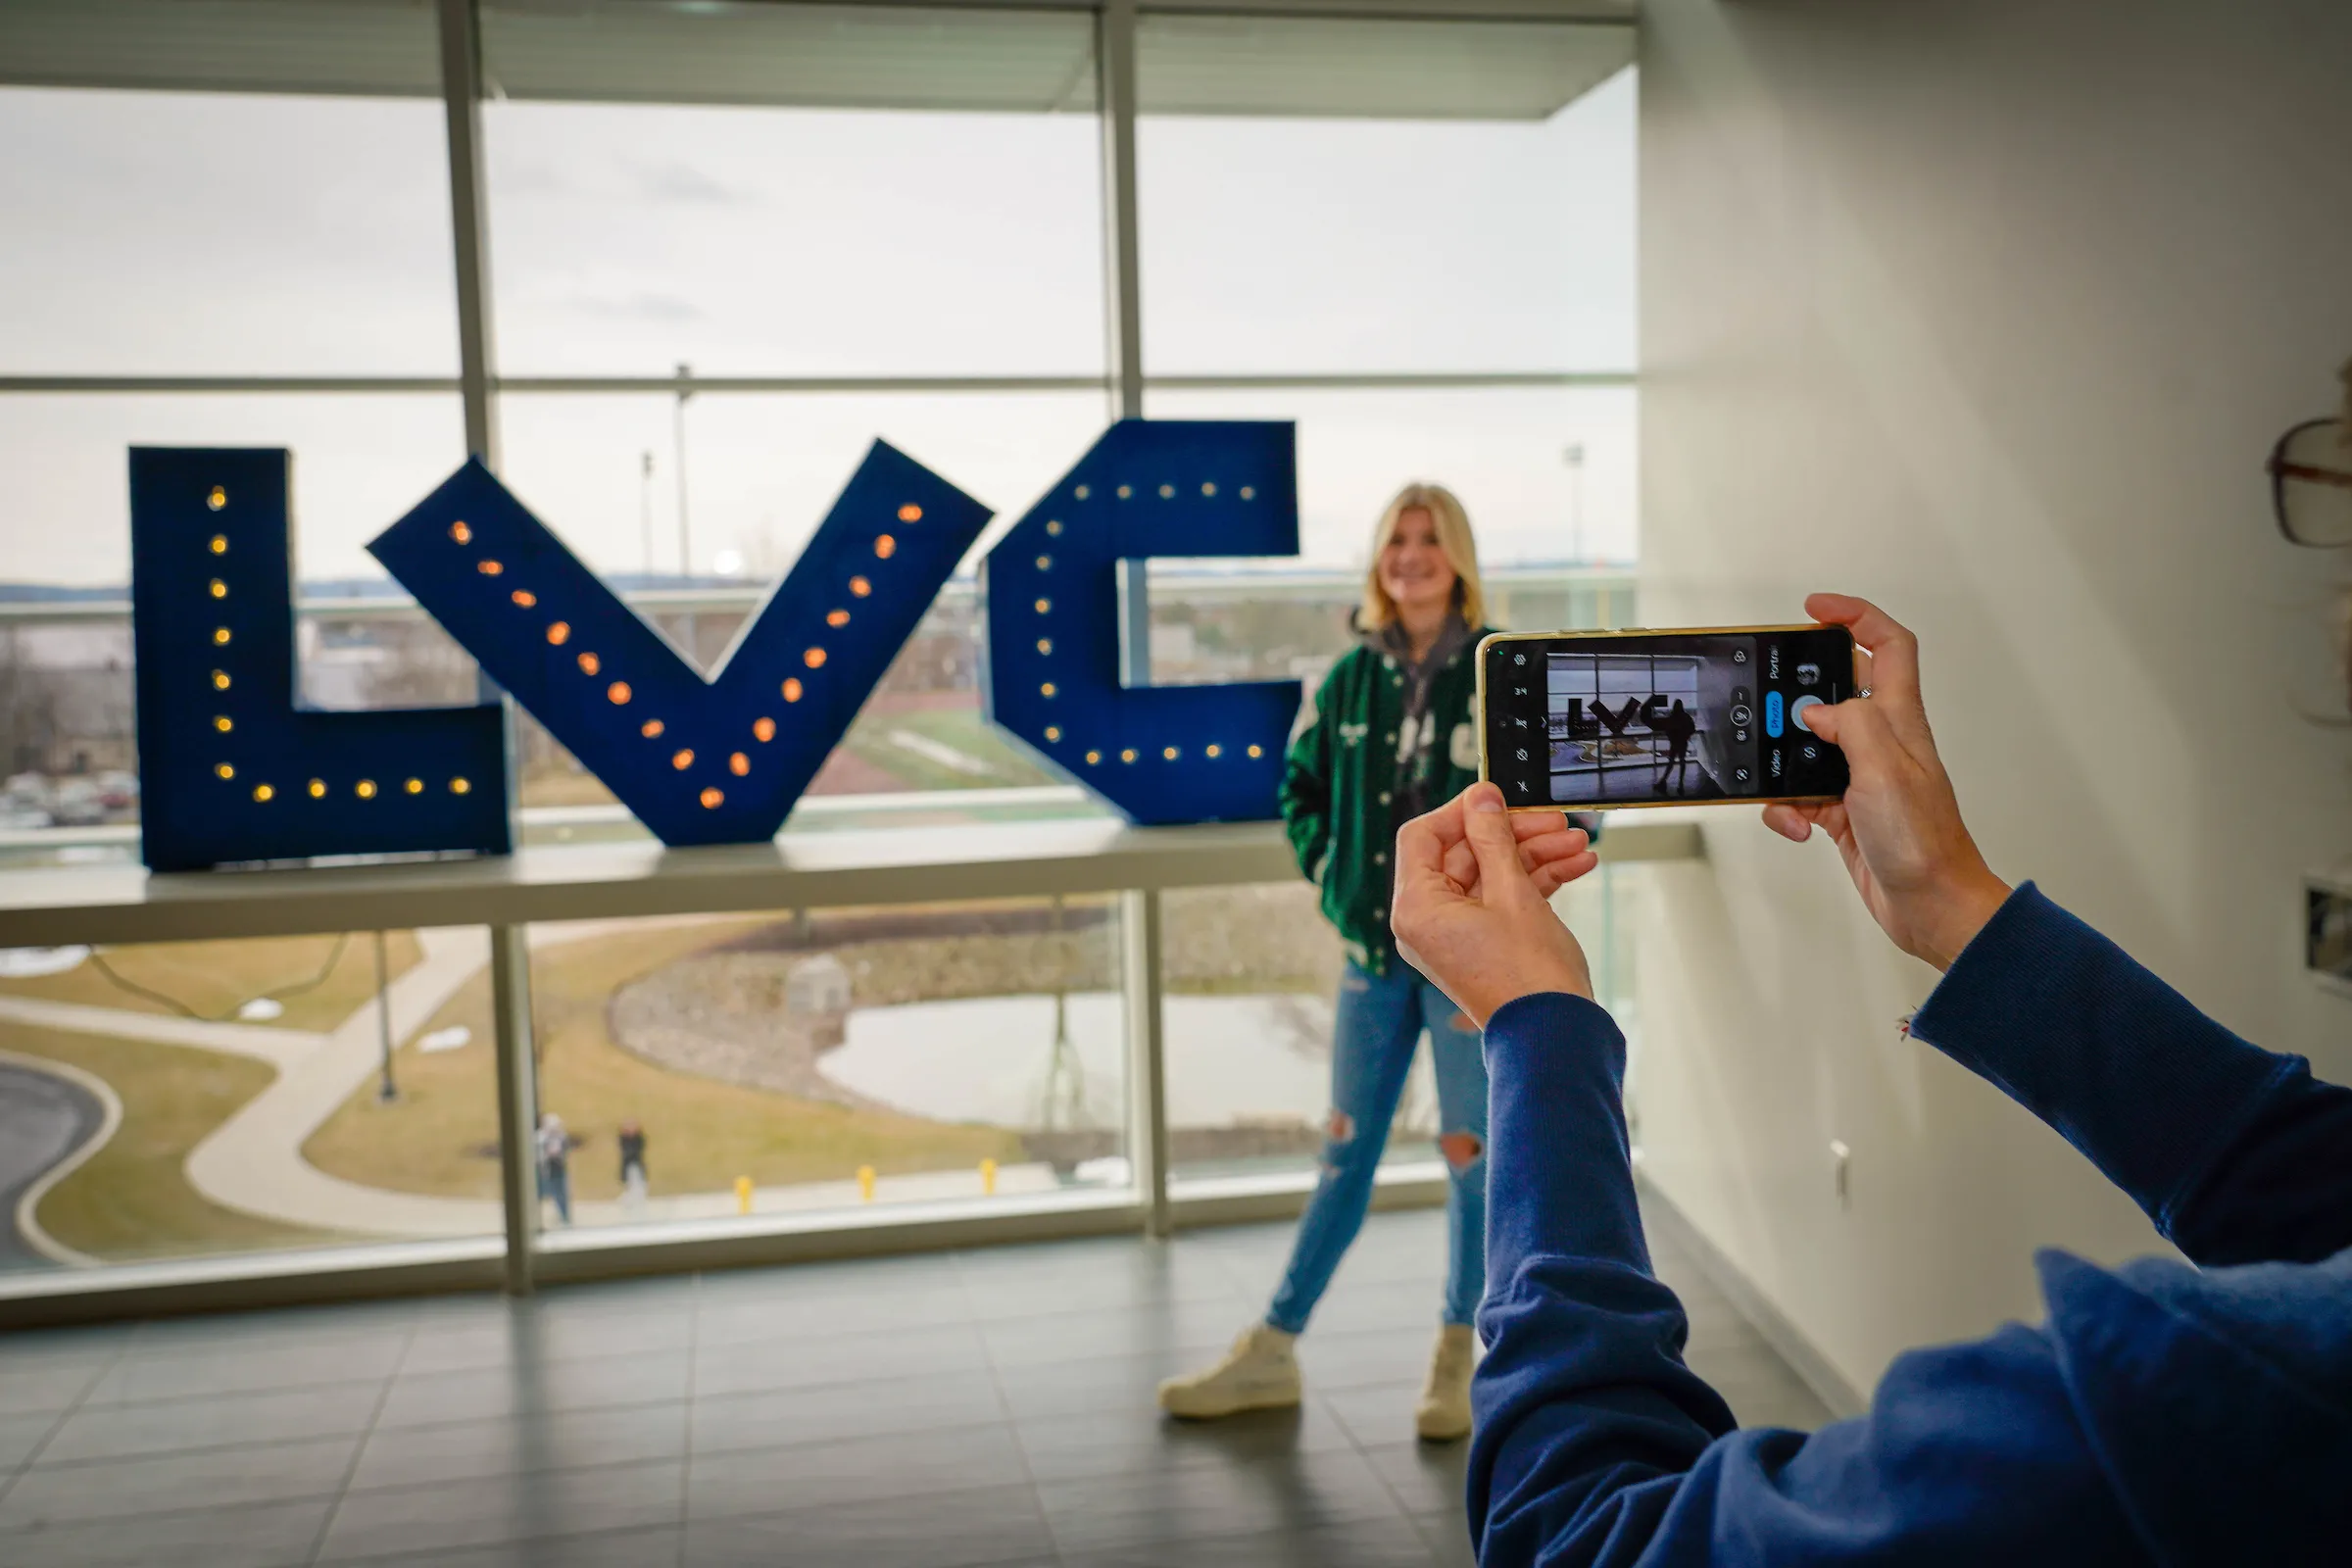 Student poses for photo with LVC letters at LVC Live admitted student event